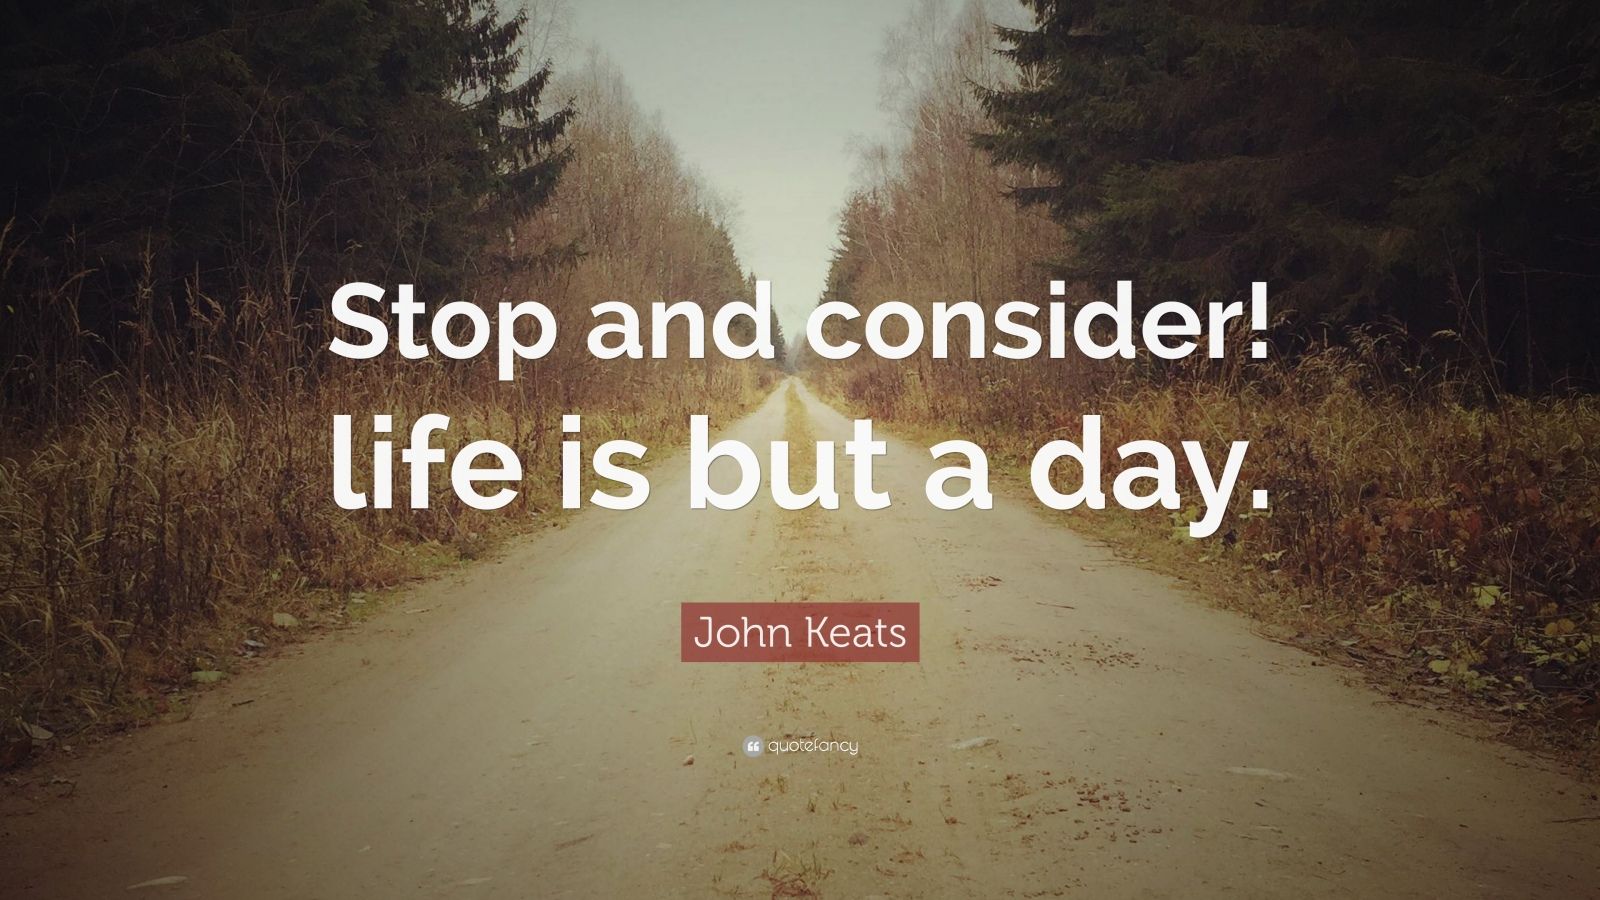 John Keats Quote: “Stop and consider! life is but a day.”